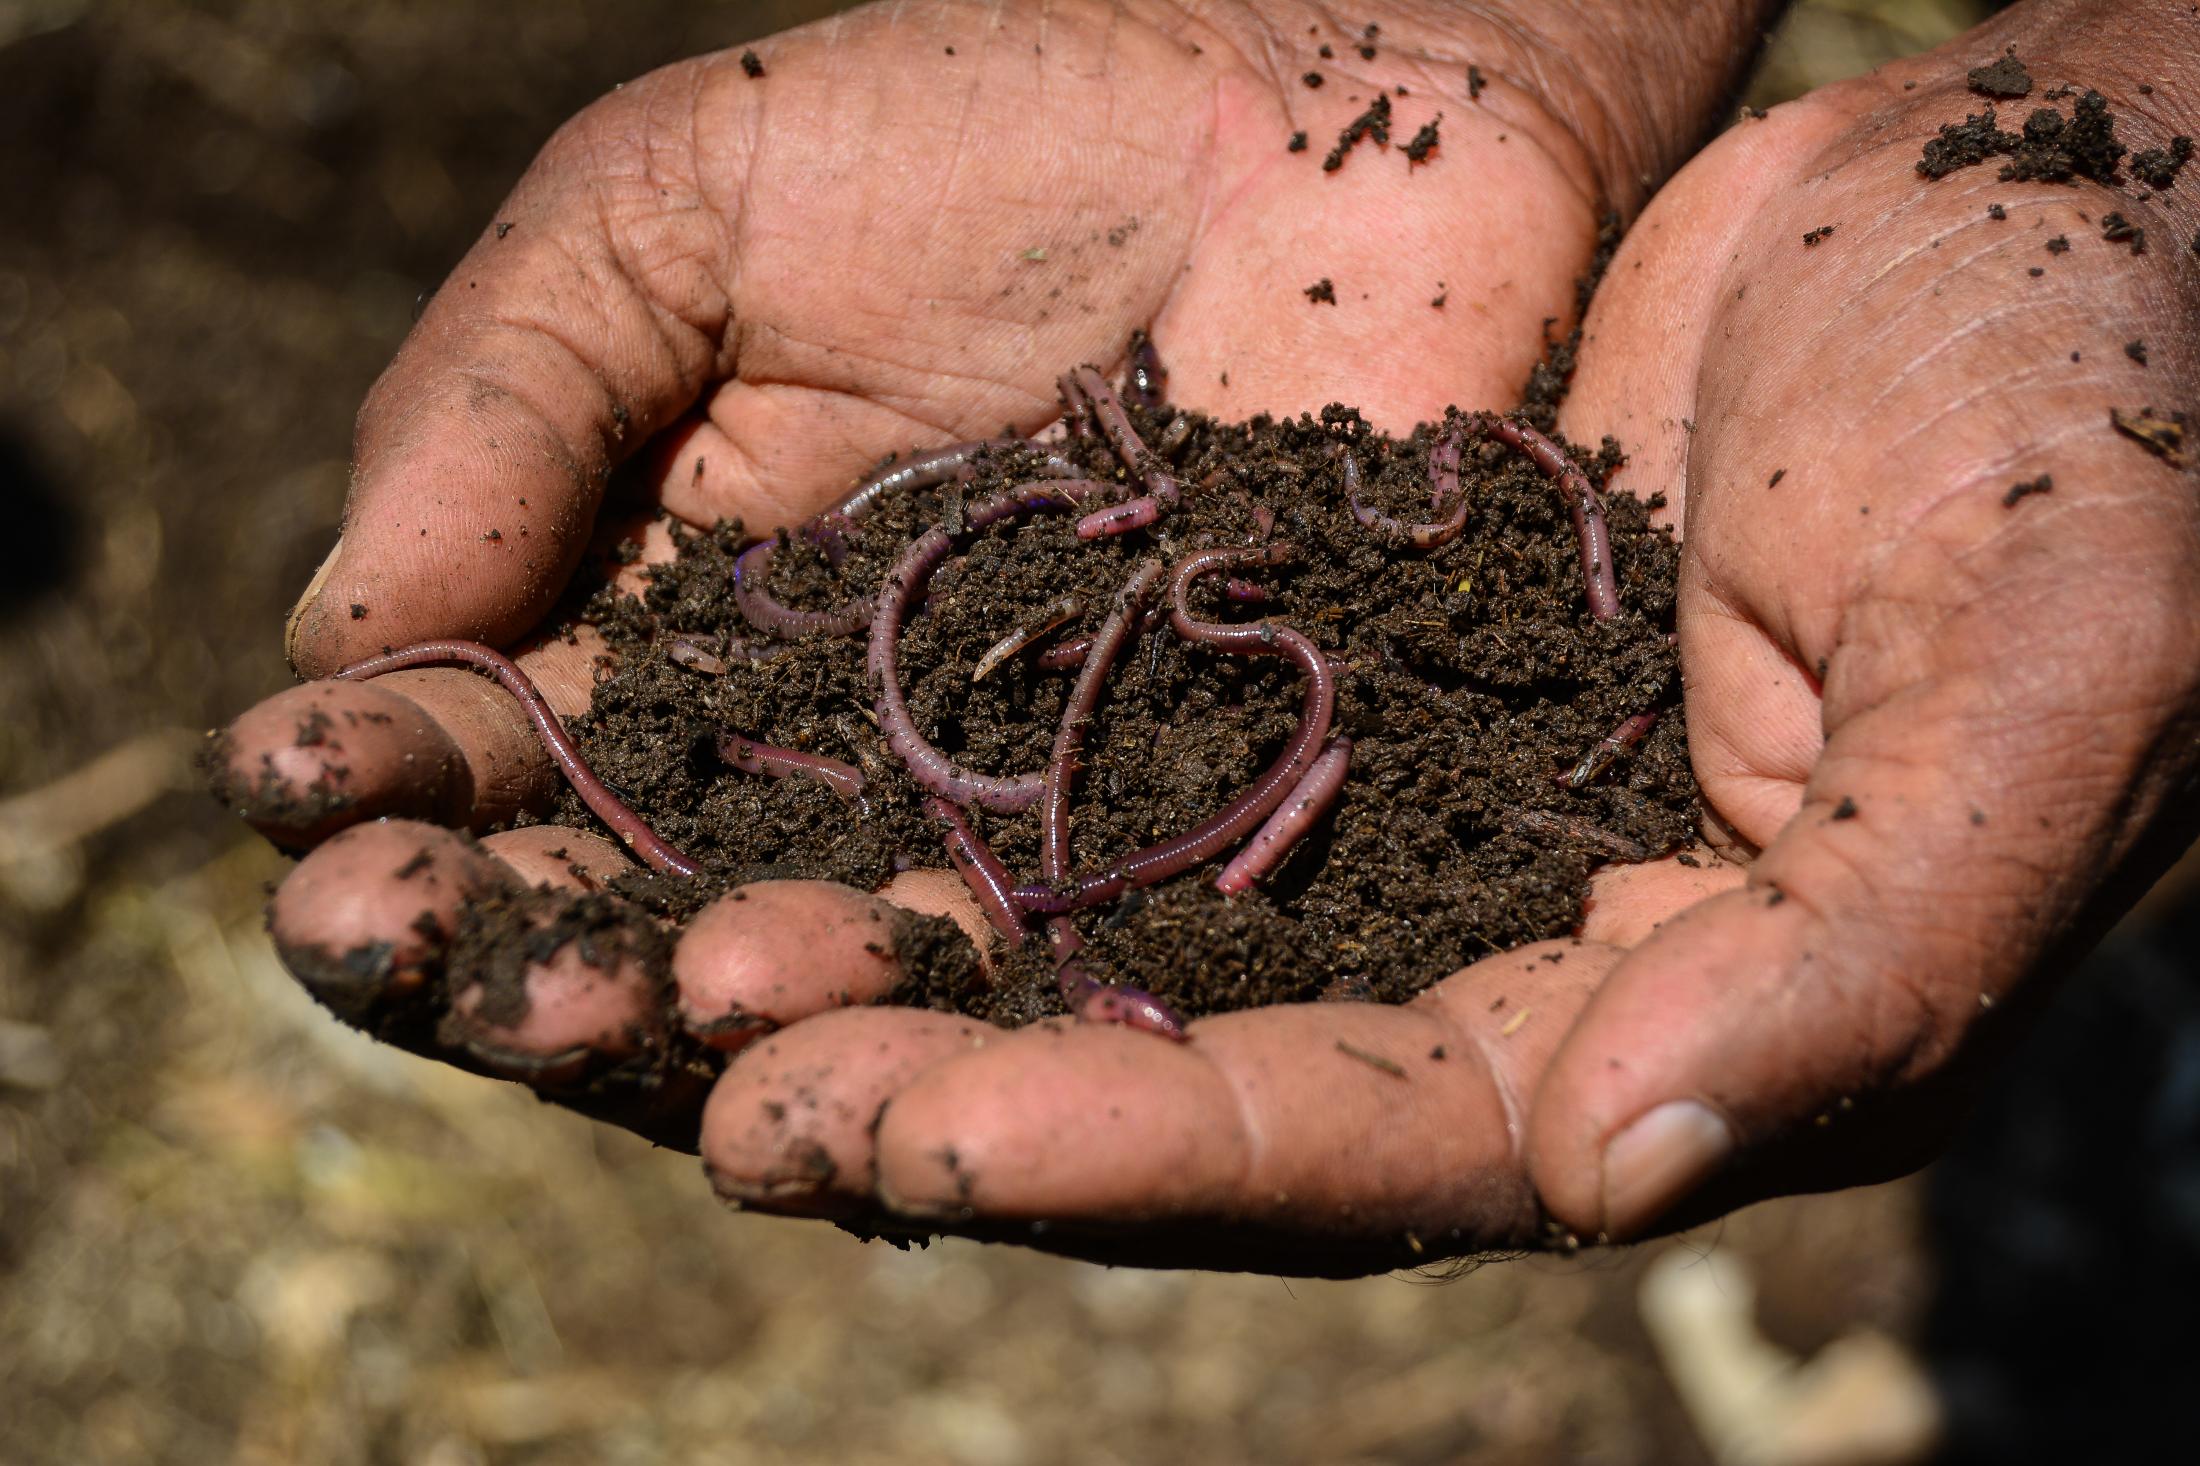 All these farmers use natural compost and have adopted vermiculture. None of them use chemicals